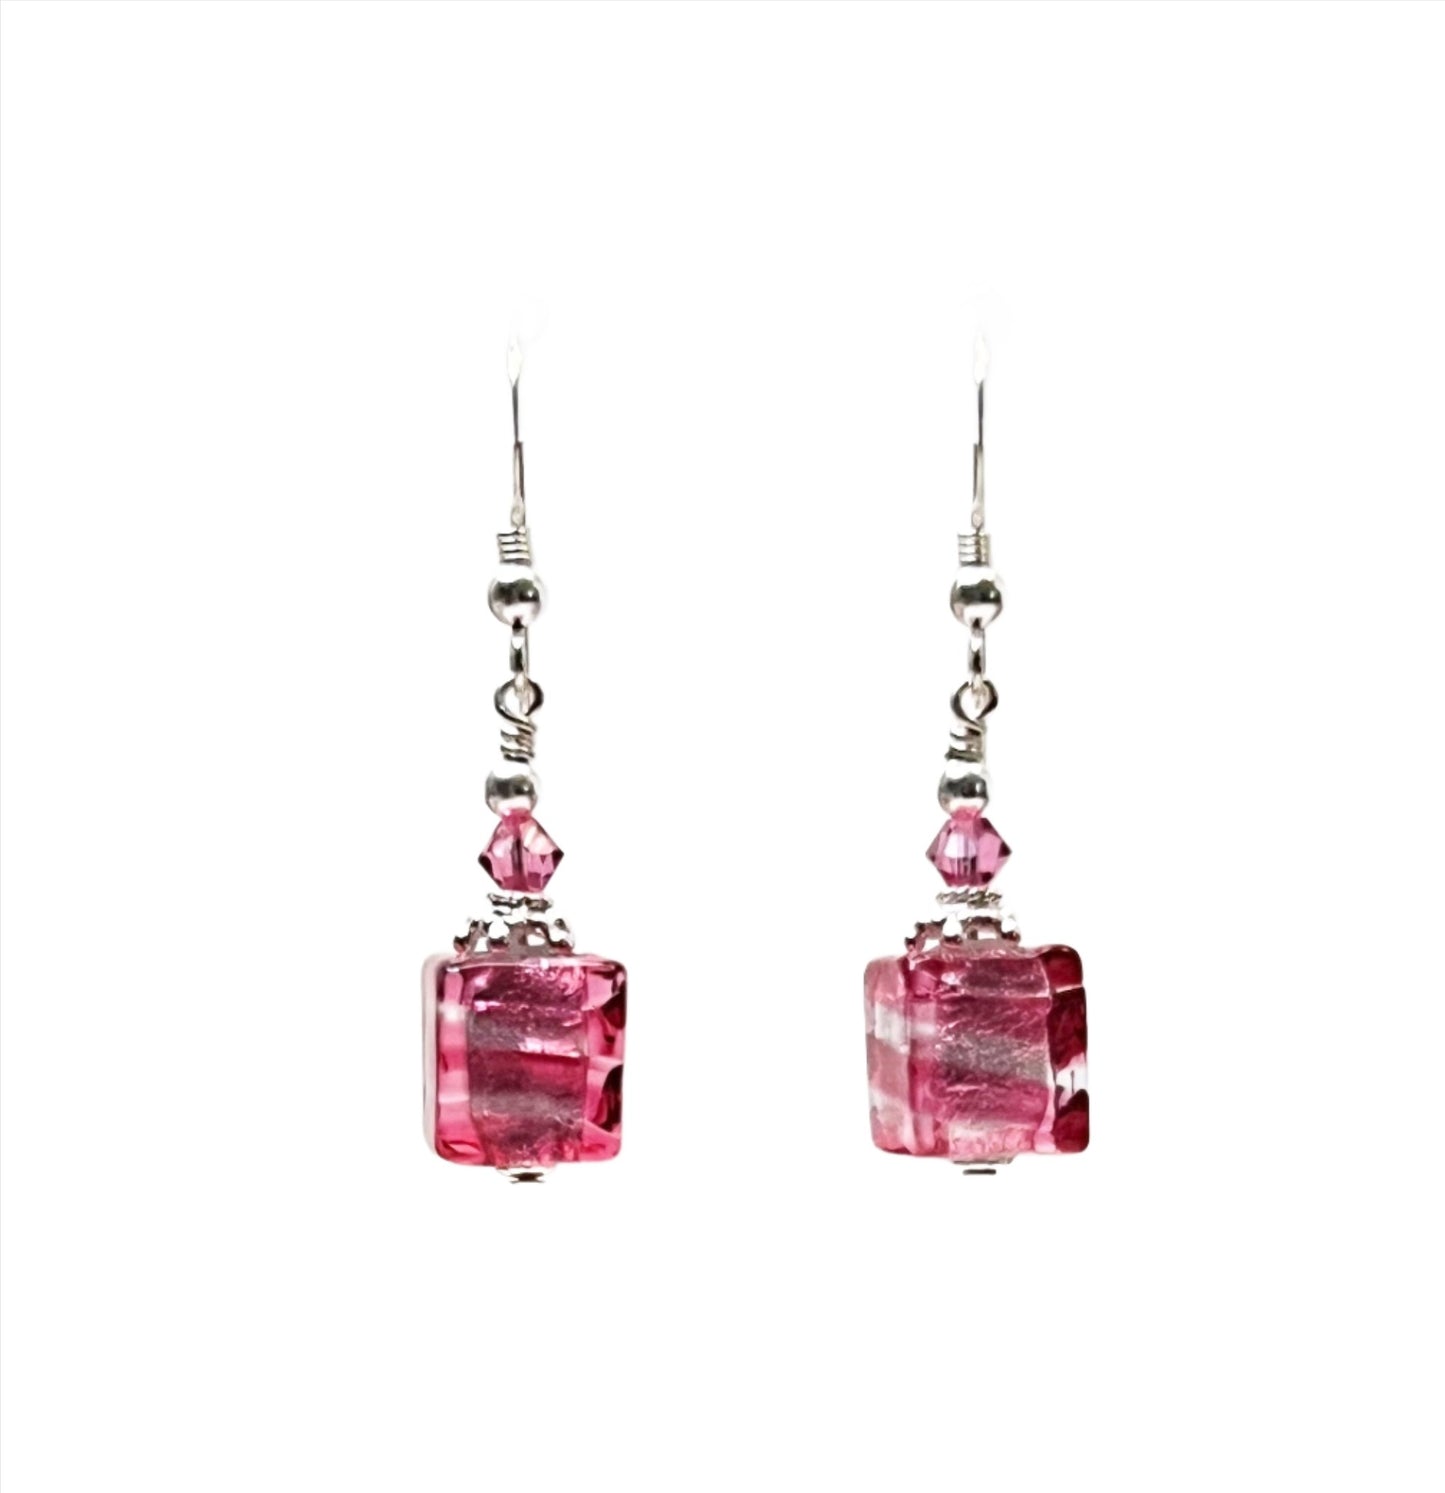 a pair of earrings with pink stones hanging from them